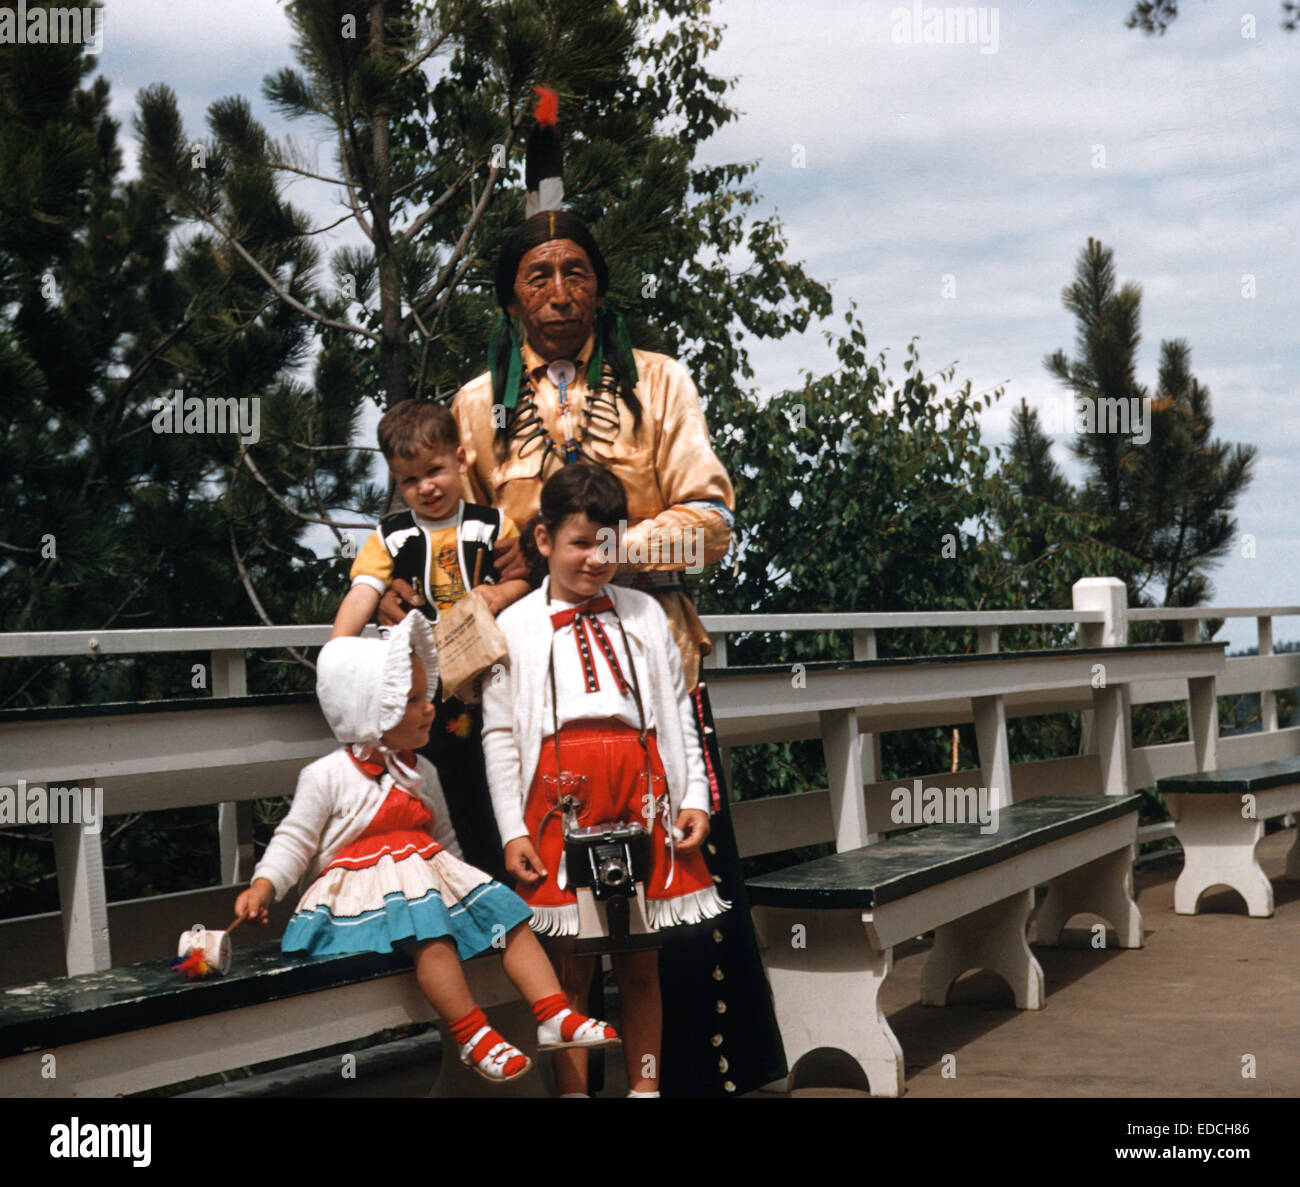 Vintage 1950's Image of Colorfully Dressed Children with Native American Man, Mount Rushmore, South Dakota, USA Stock Photo